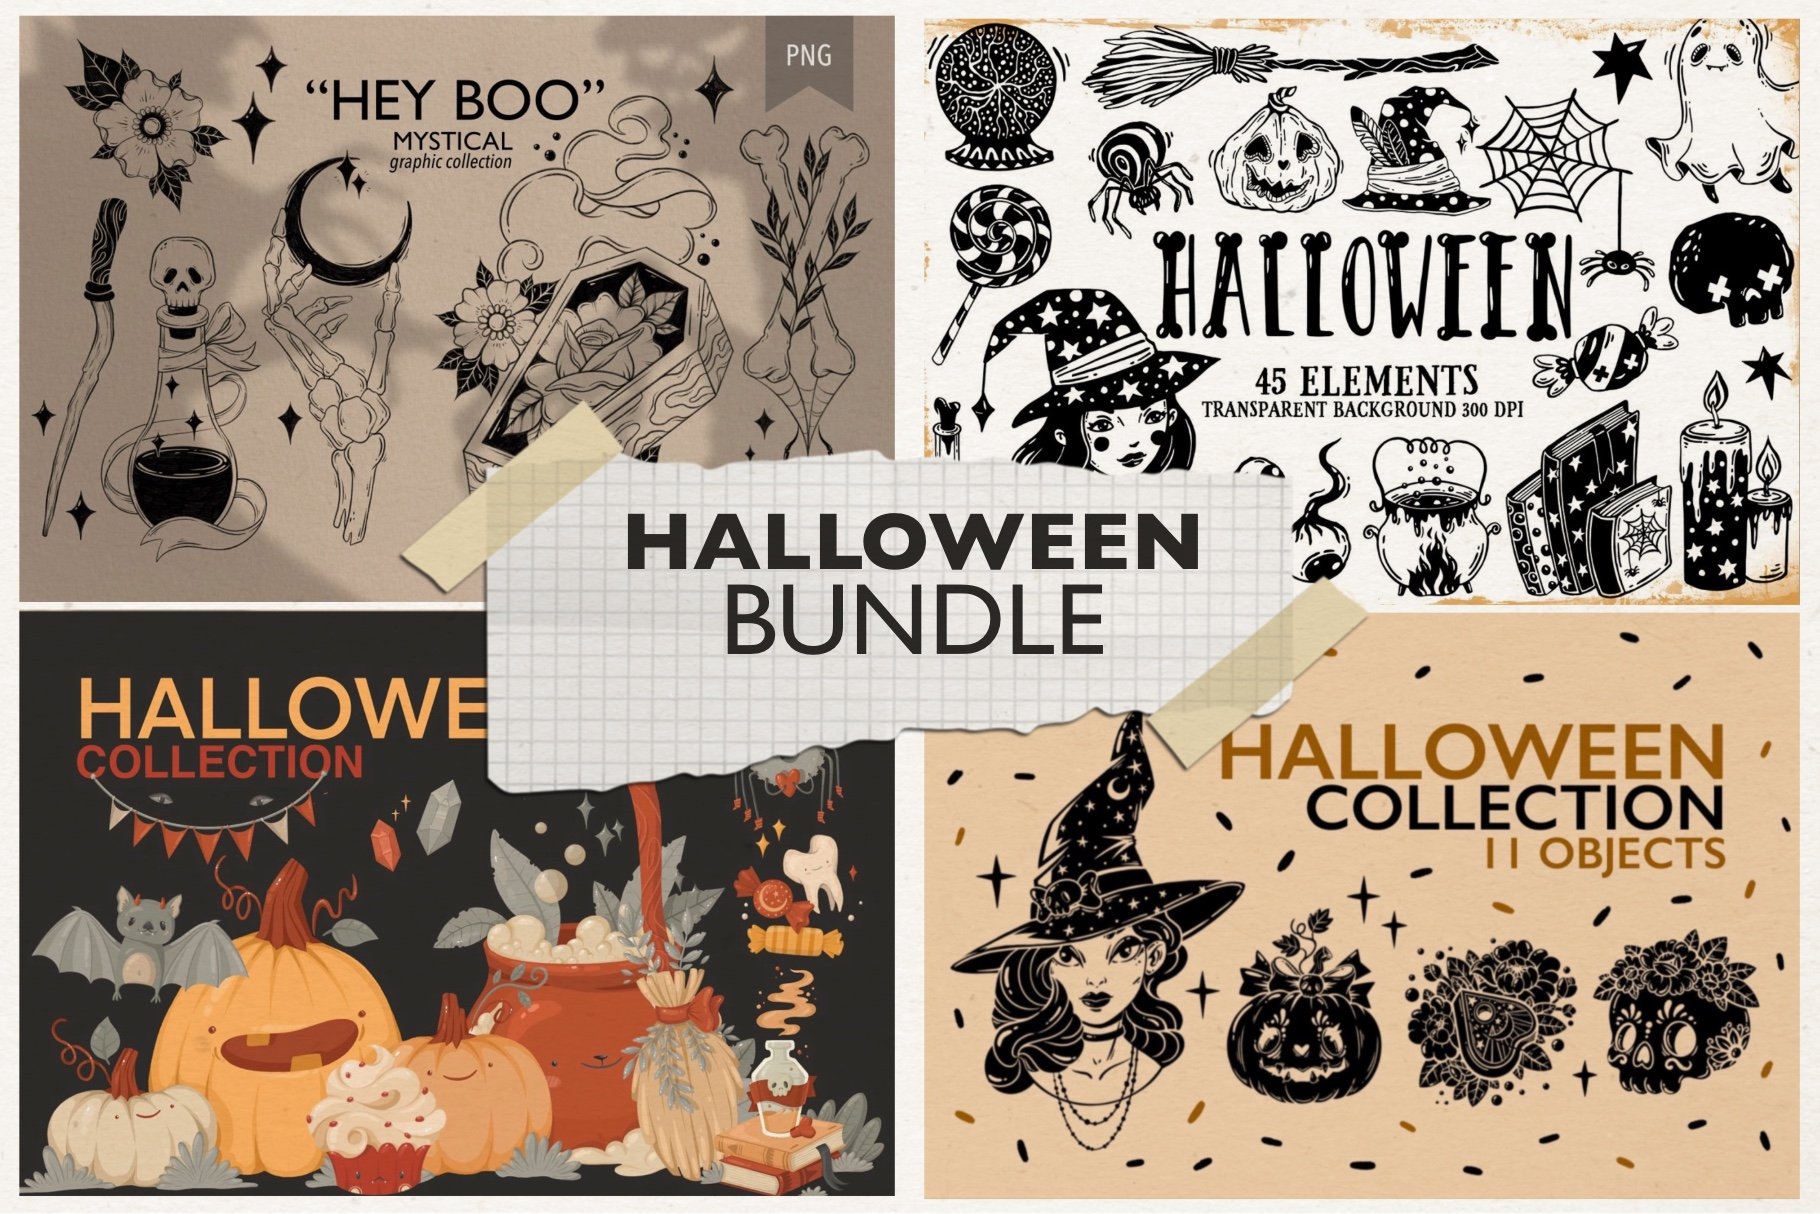 Use this collection for your festive Halloween mood.